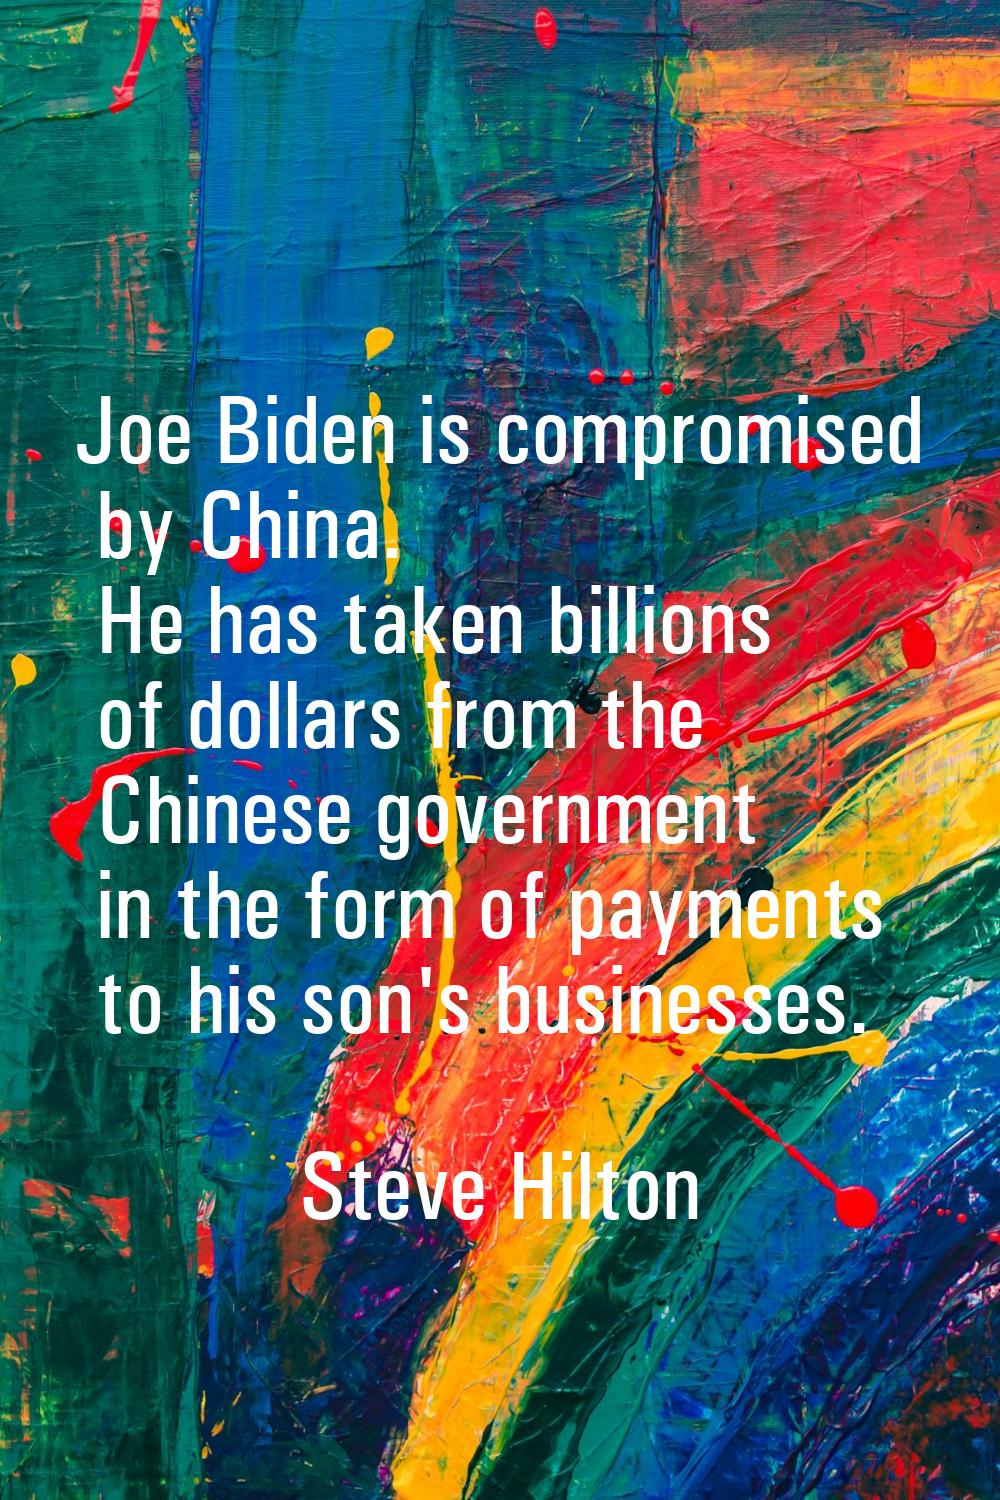 Joe Biden is compromised by China. He has taken billions of dollars from the Chinese government in 